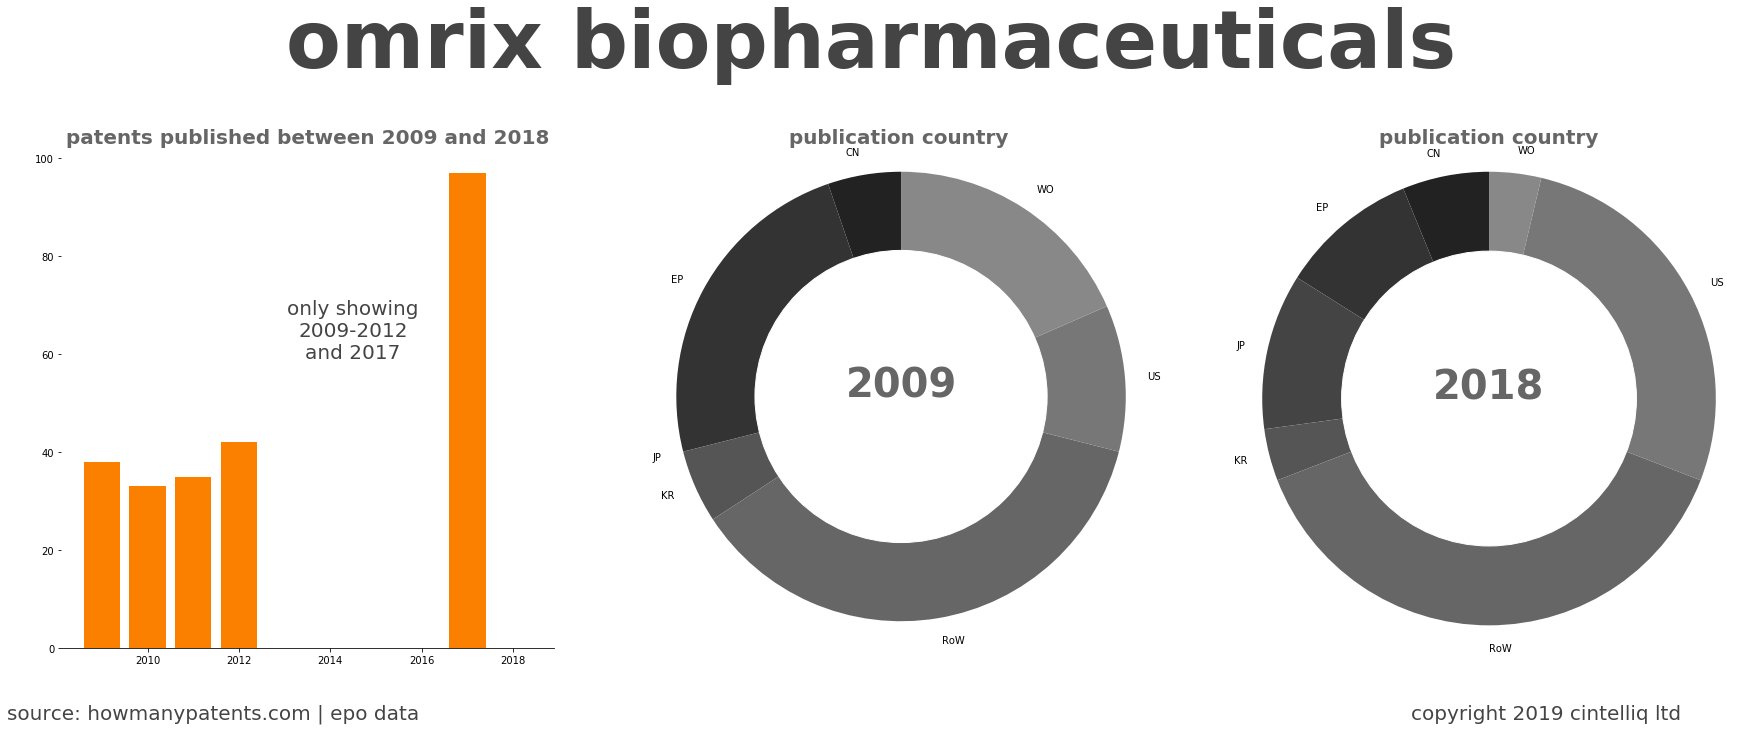 summary of patents for Omrix Biopharmaceuticals